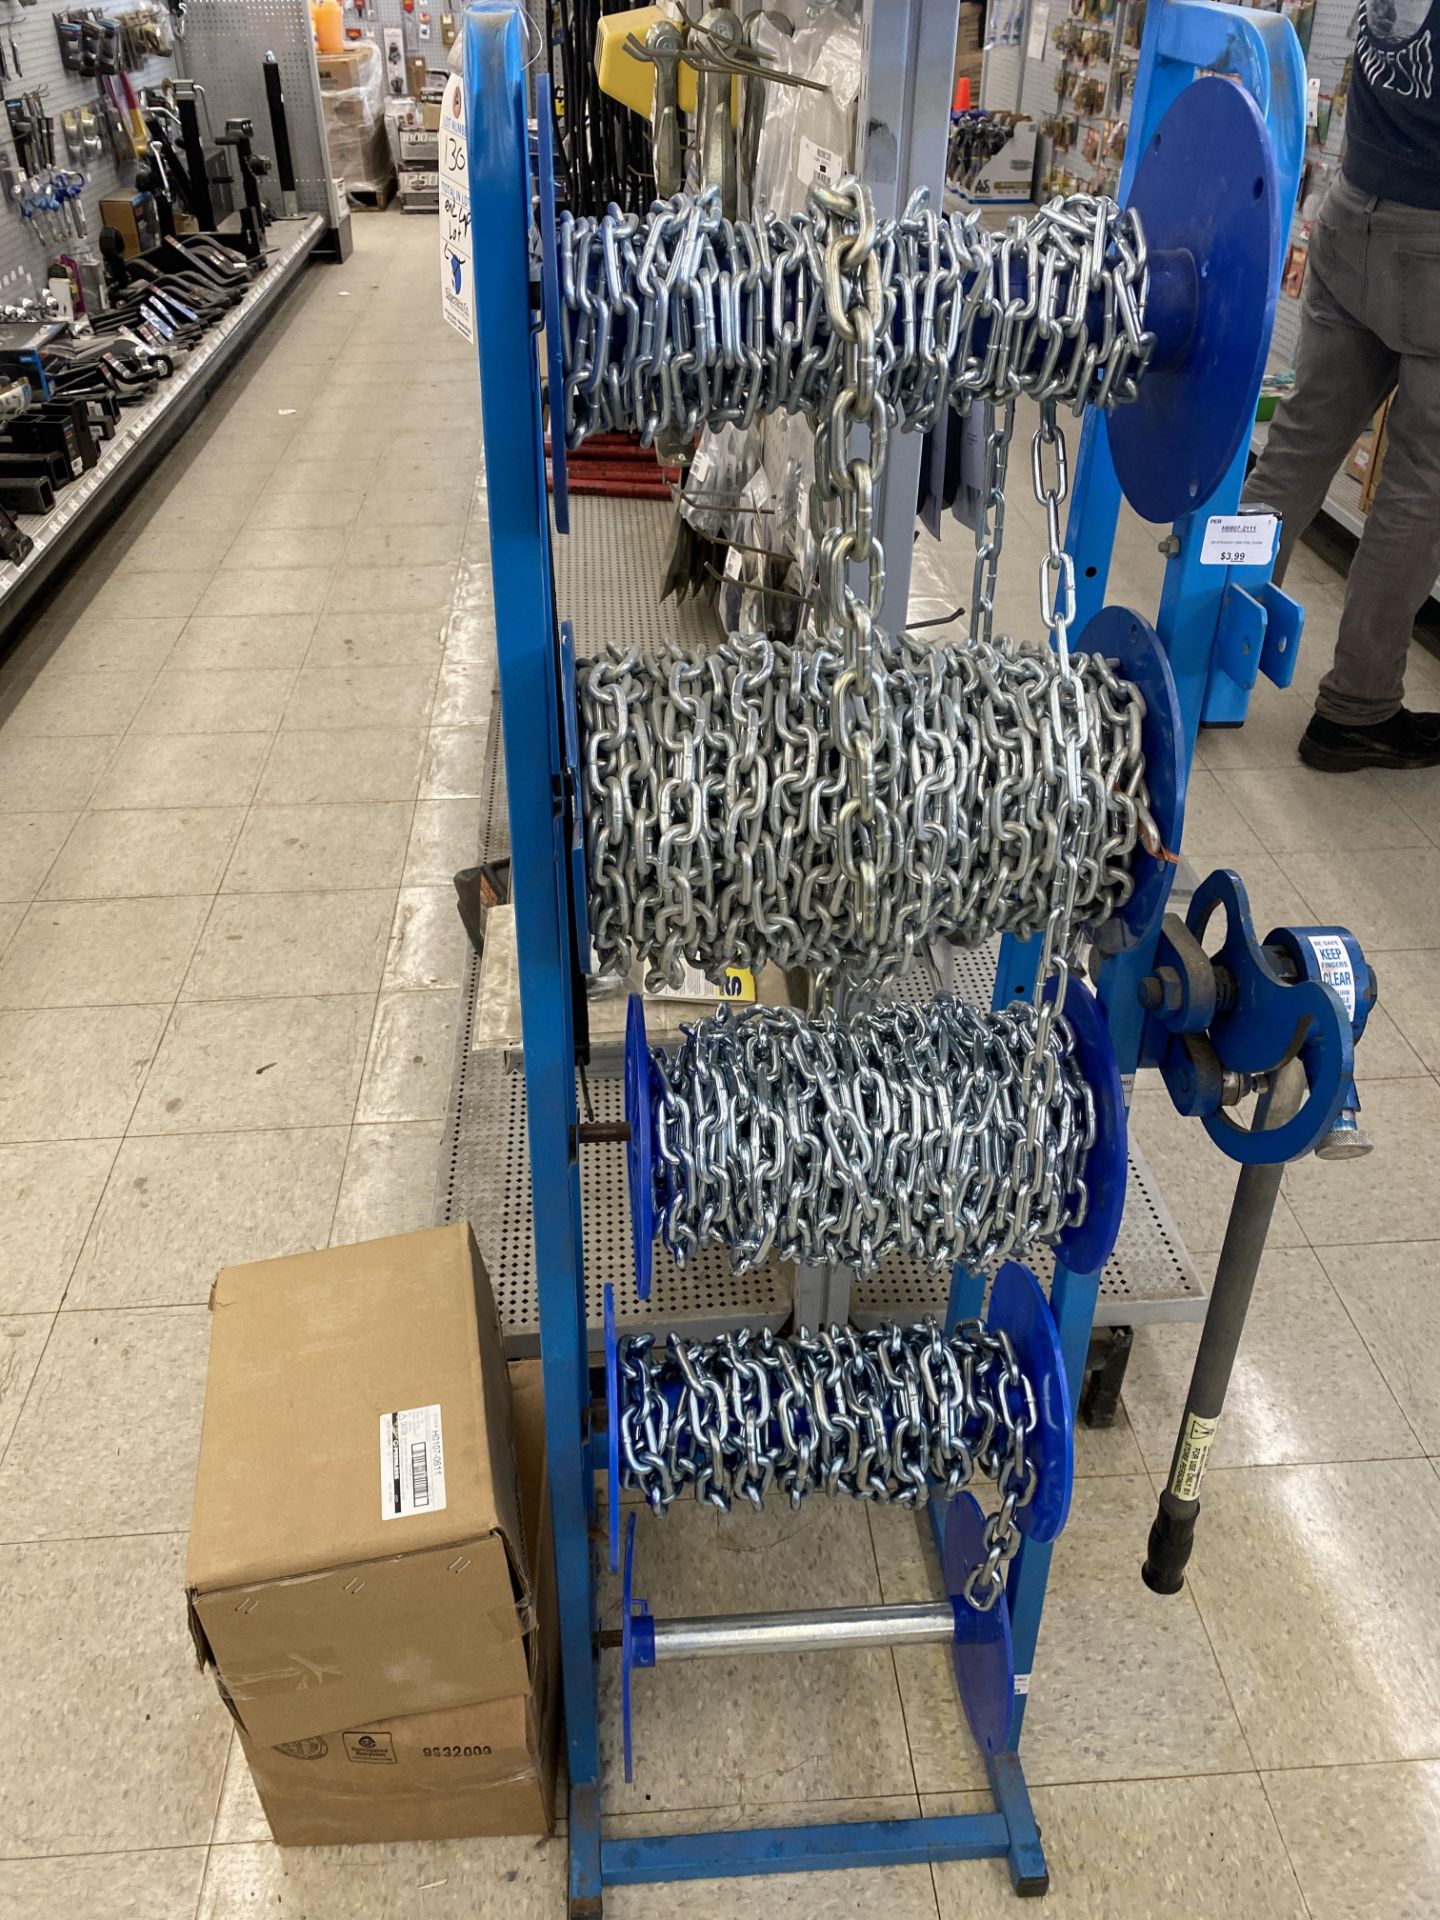 {LOT} Peerless 3/16", 1/4", and 5/16" Chains w/ D Rings and Hooks w/ Rack Wholesale Value 1000 - Image 2 of 6